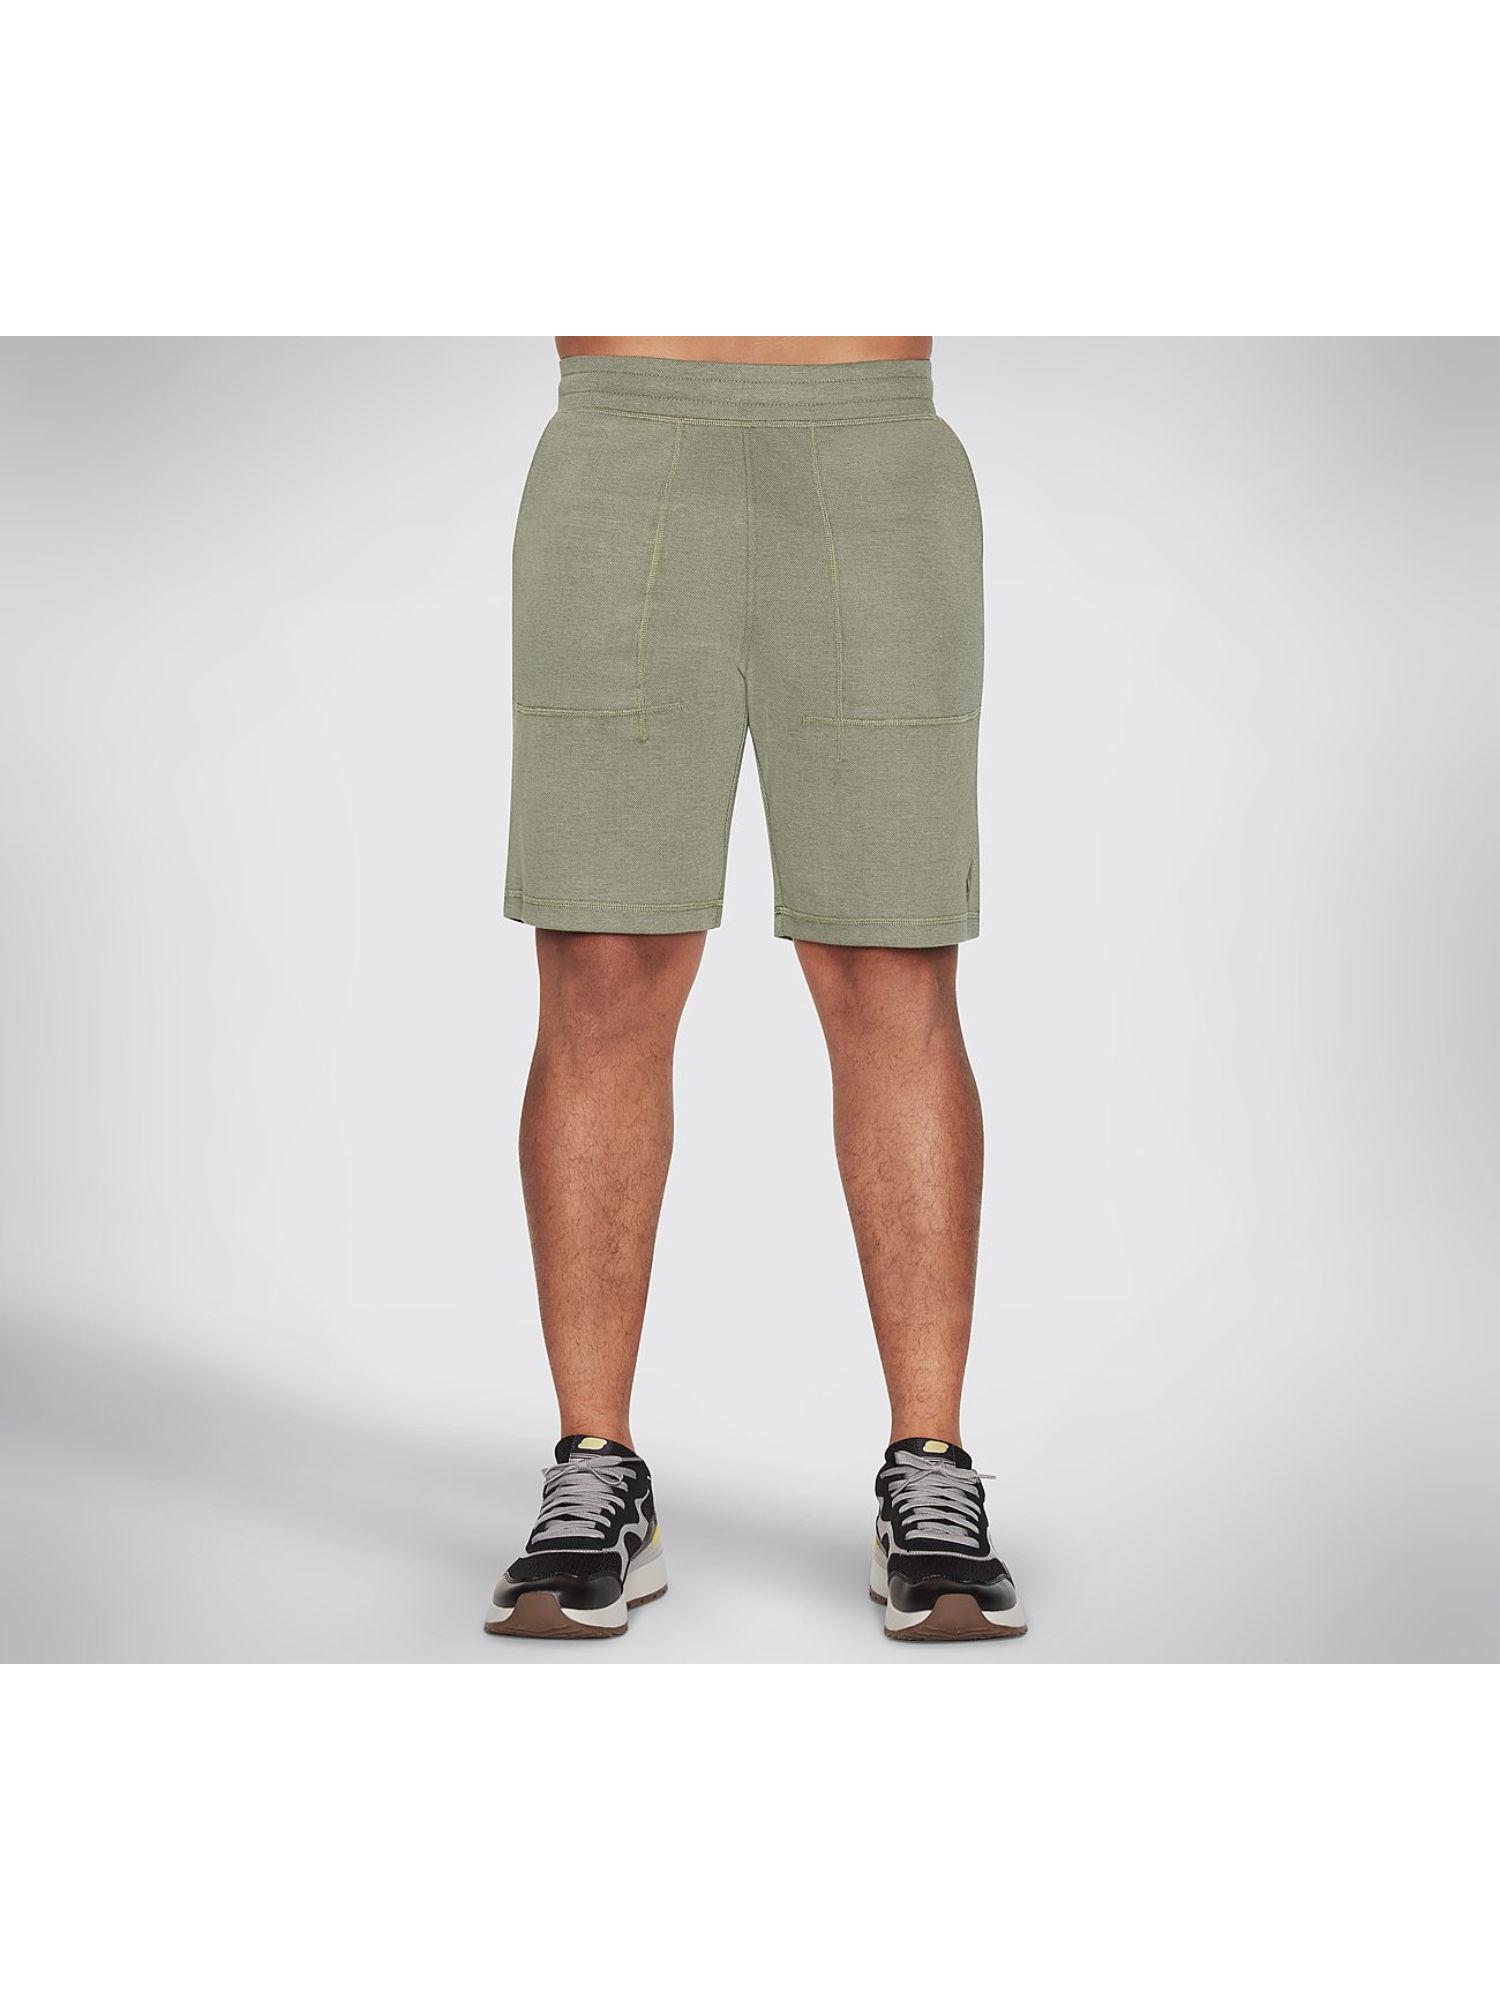 go-knit-pique-9in-shorts-olive